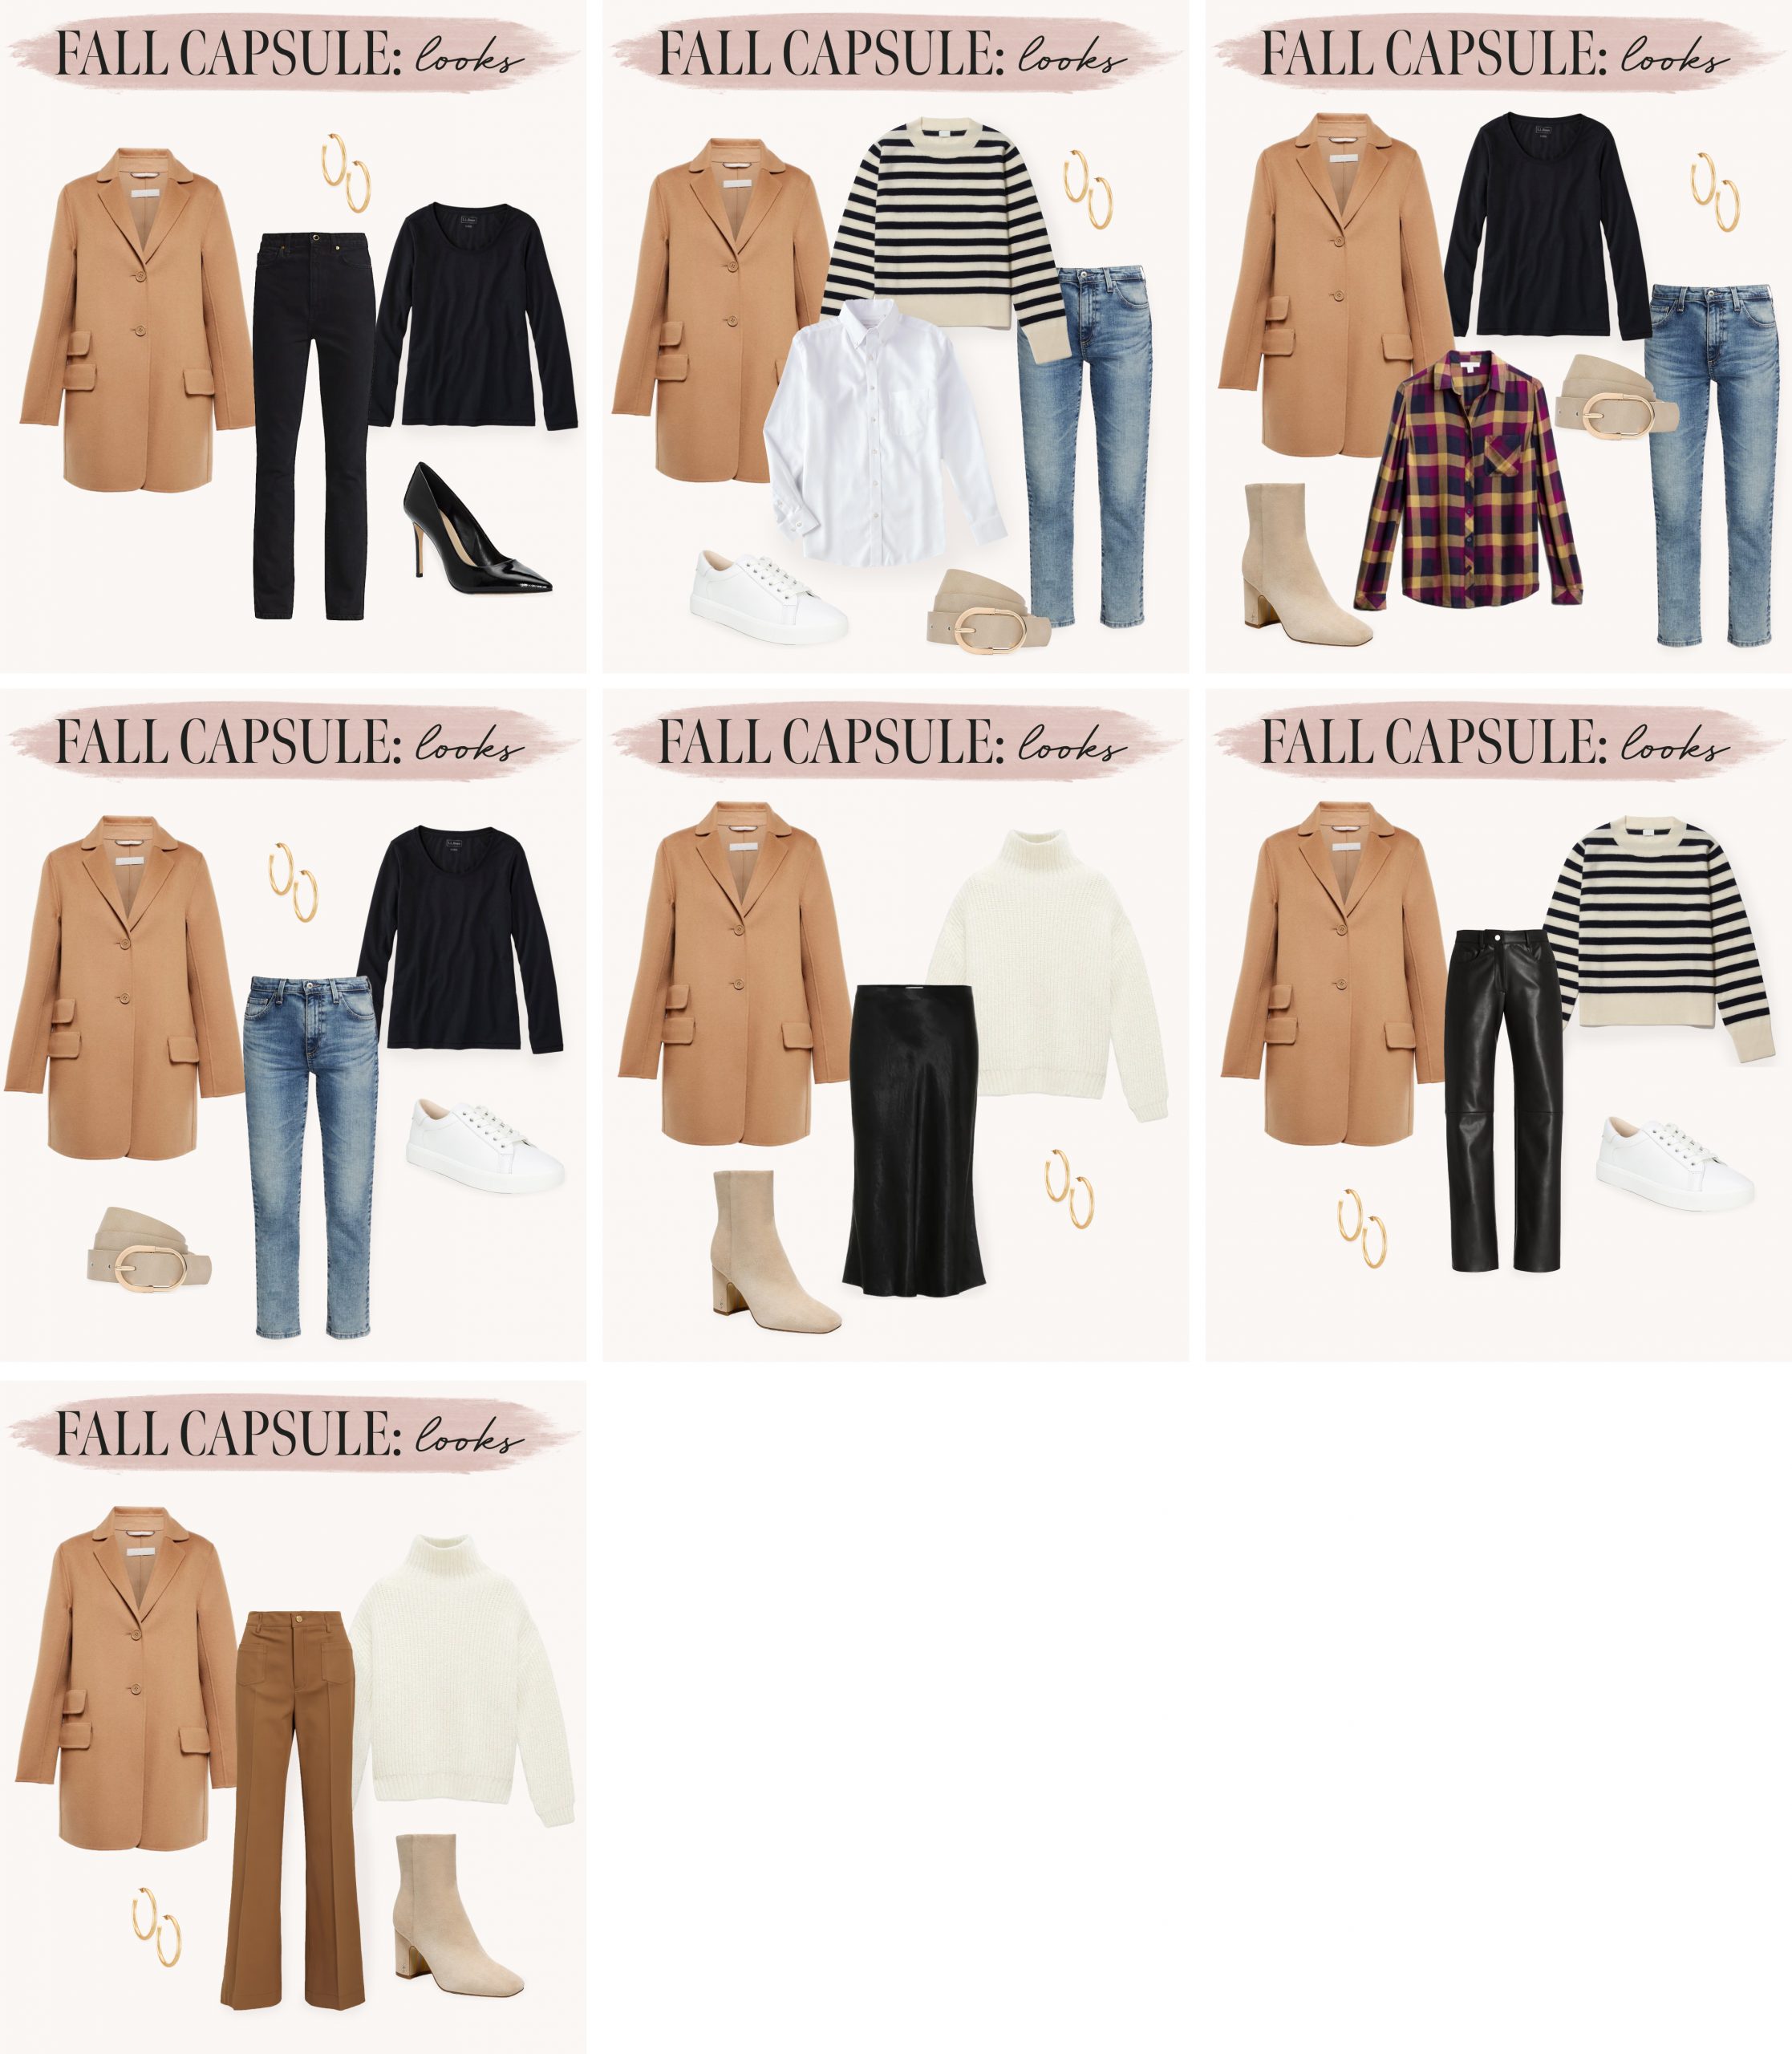 Fall Capsule Wardrobe: Staple Pieces for Countless Outfit Options